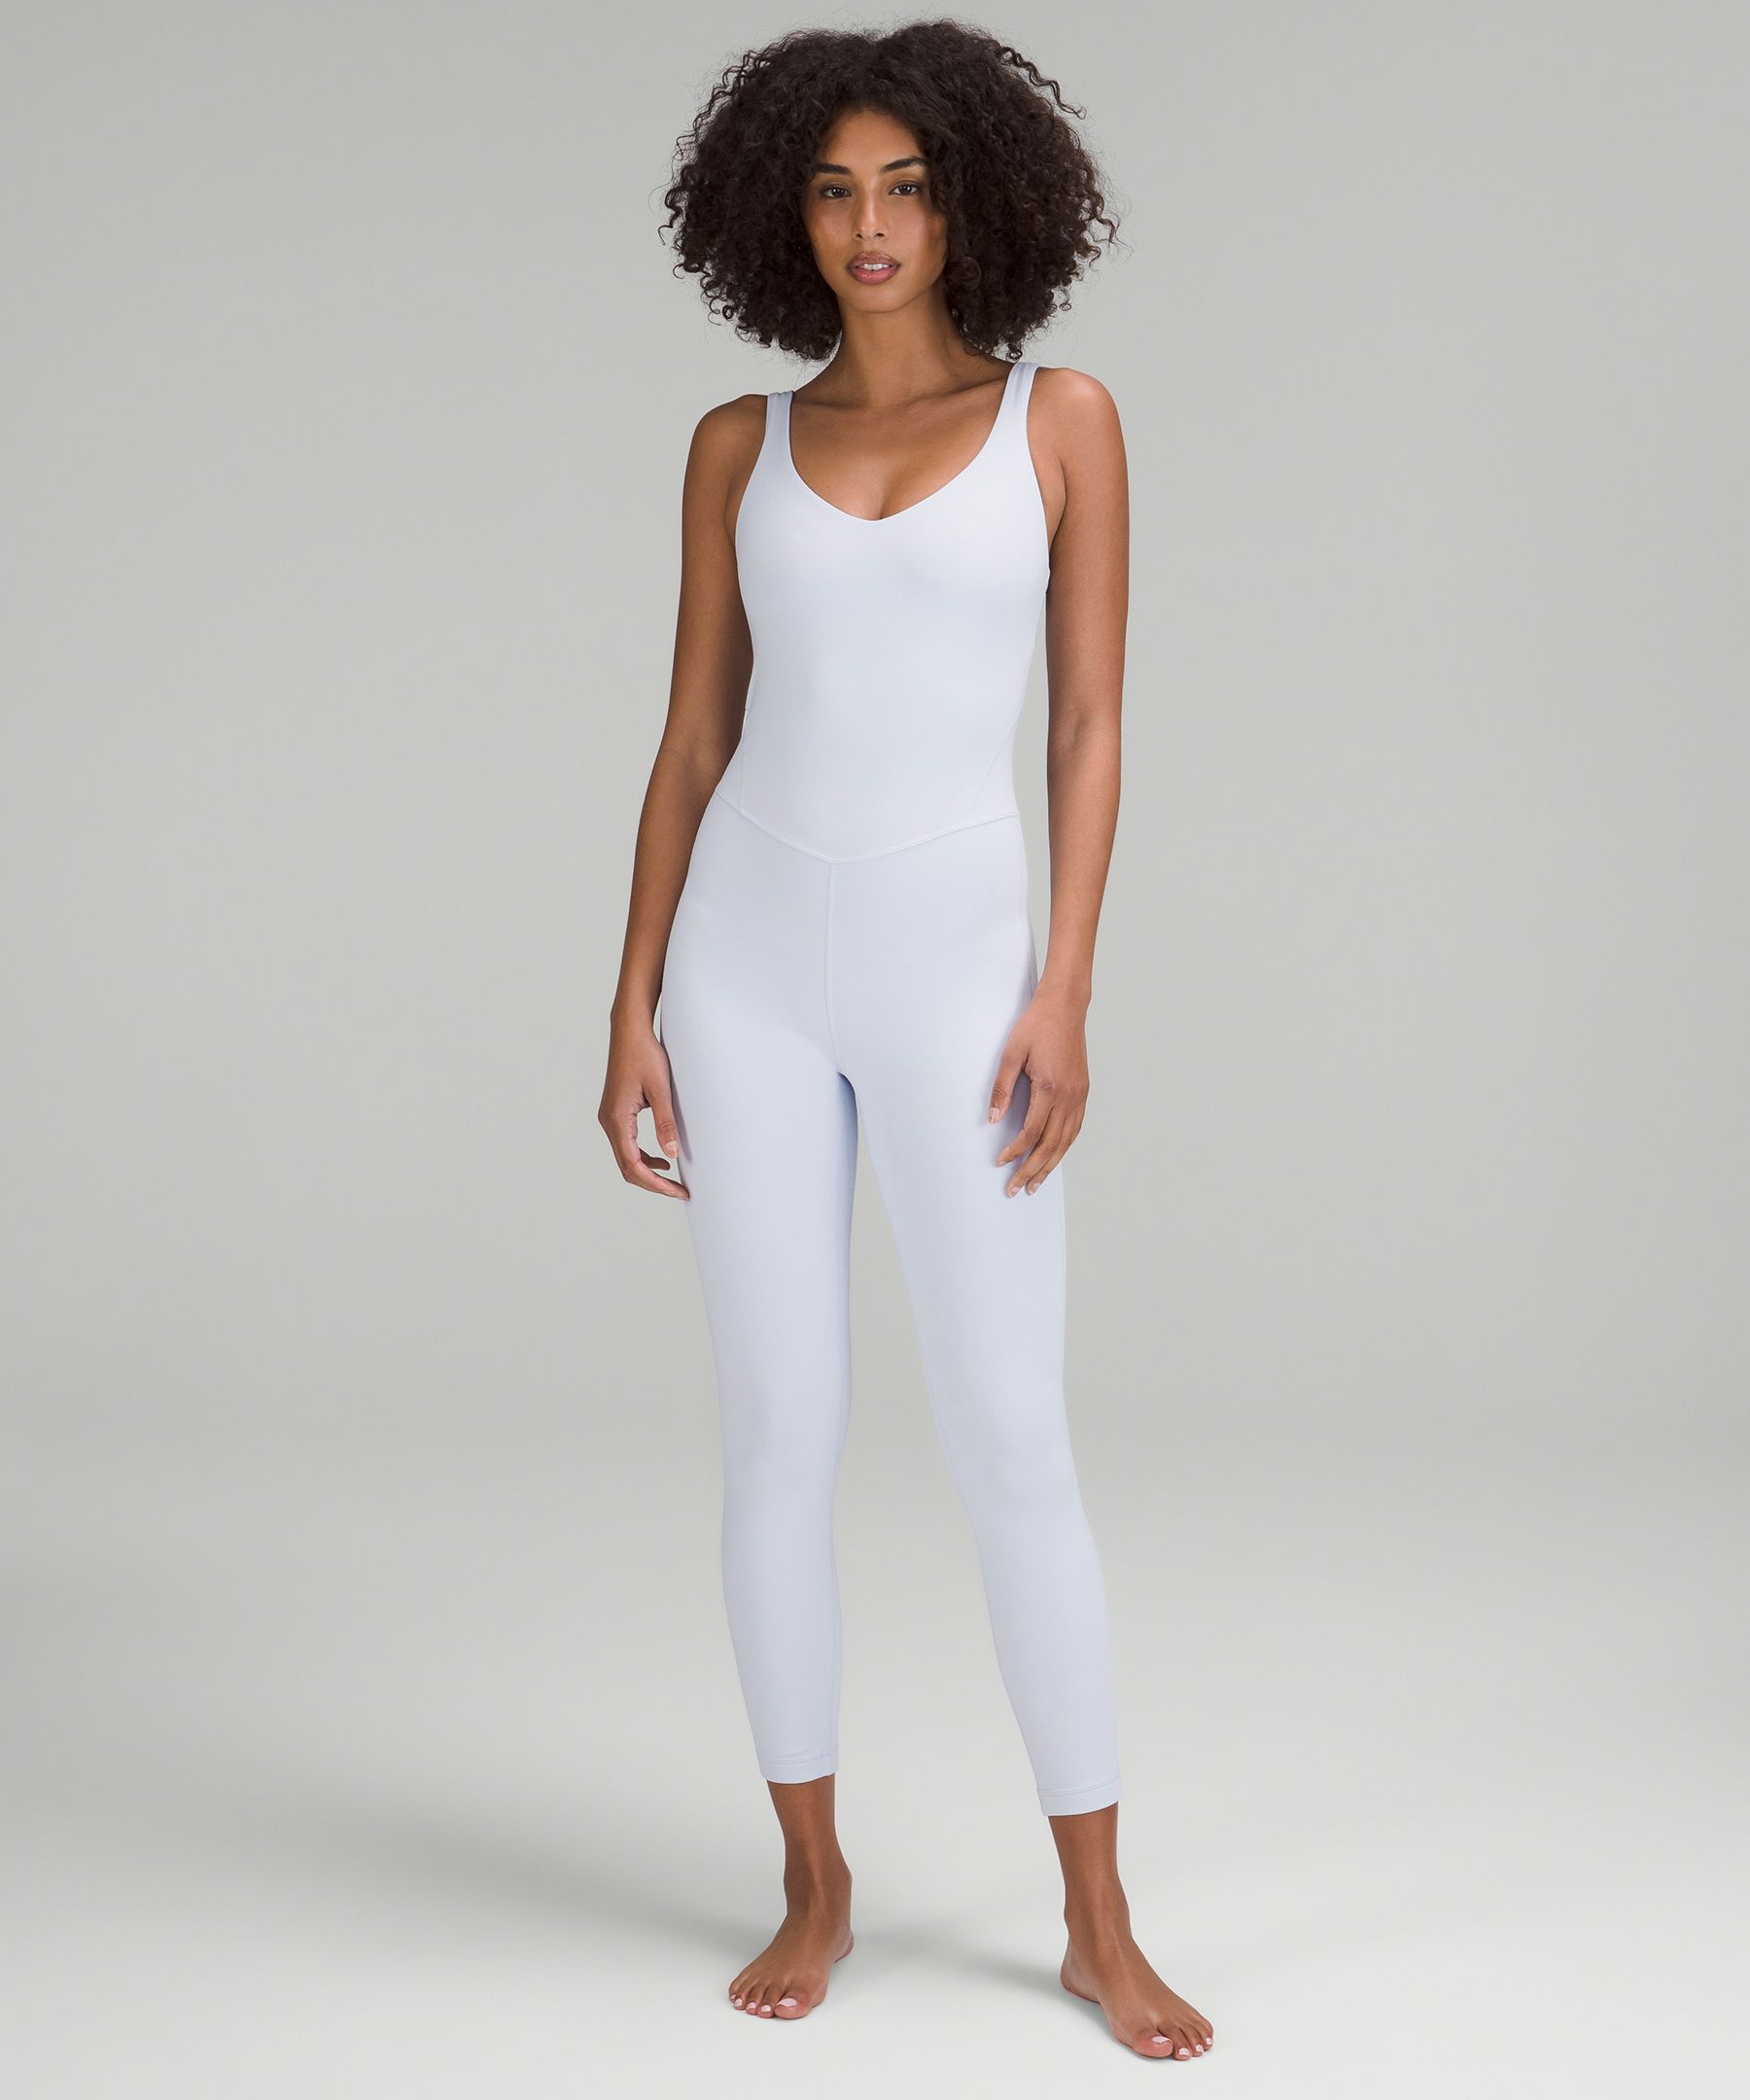 Align bodysuit 25” size 8 in smoked spruce, OS HZ scuba in M/L and